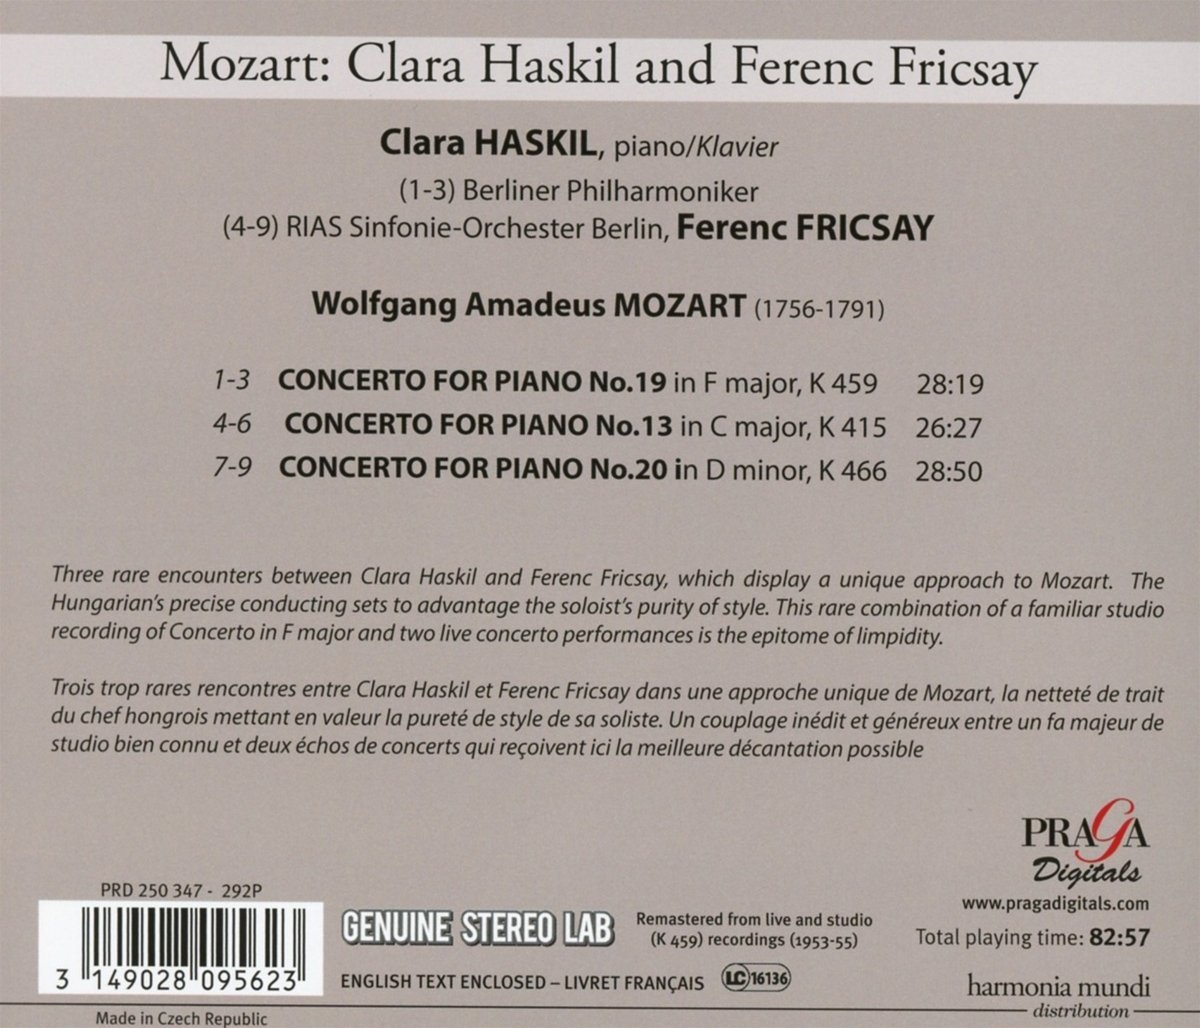 Piano Concertos No.13 19 & 20 | Berlin Philharmonic Orchestra, Clara Haskil, RIAS Sinfonie-Orchester Berlin, Wolfgang Amadeus Mozart, Ferenc Fricsay